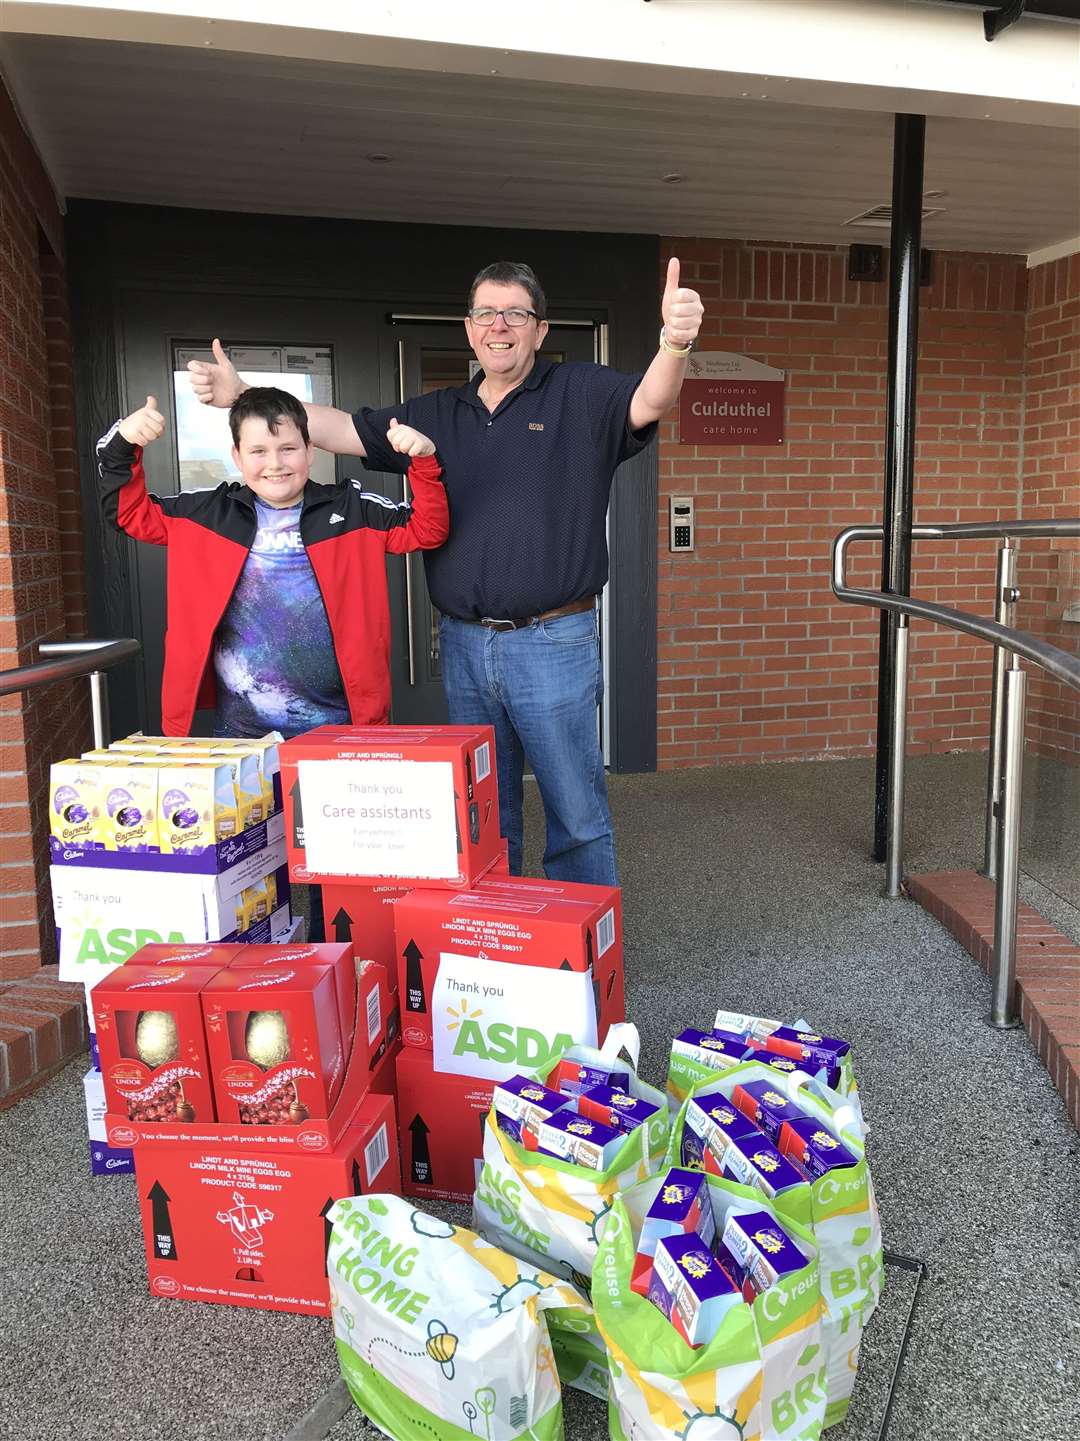 Robert McKendrick and his son John drop off the Easter eggs gifts at Culduthel Care Home.